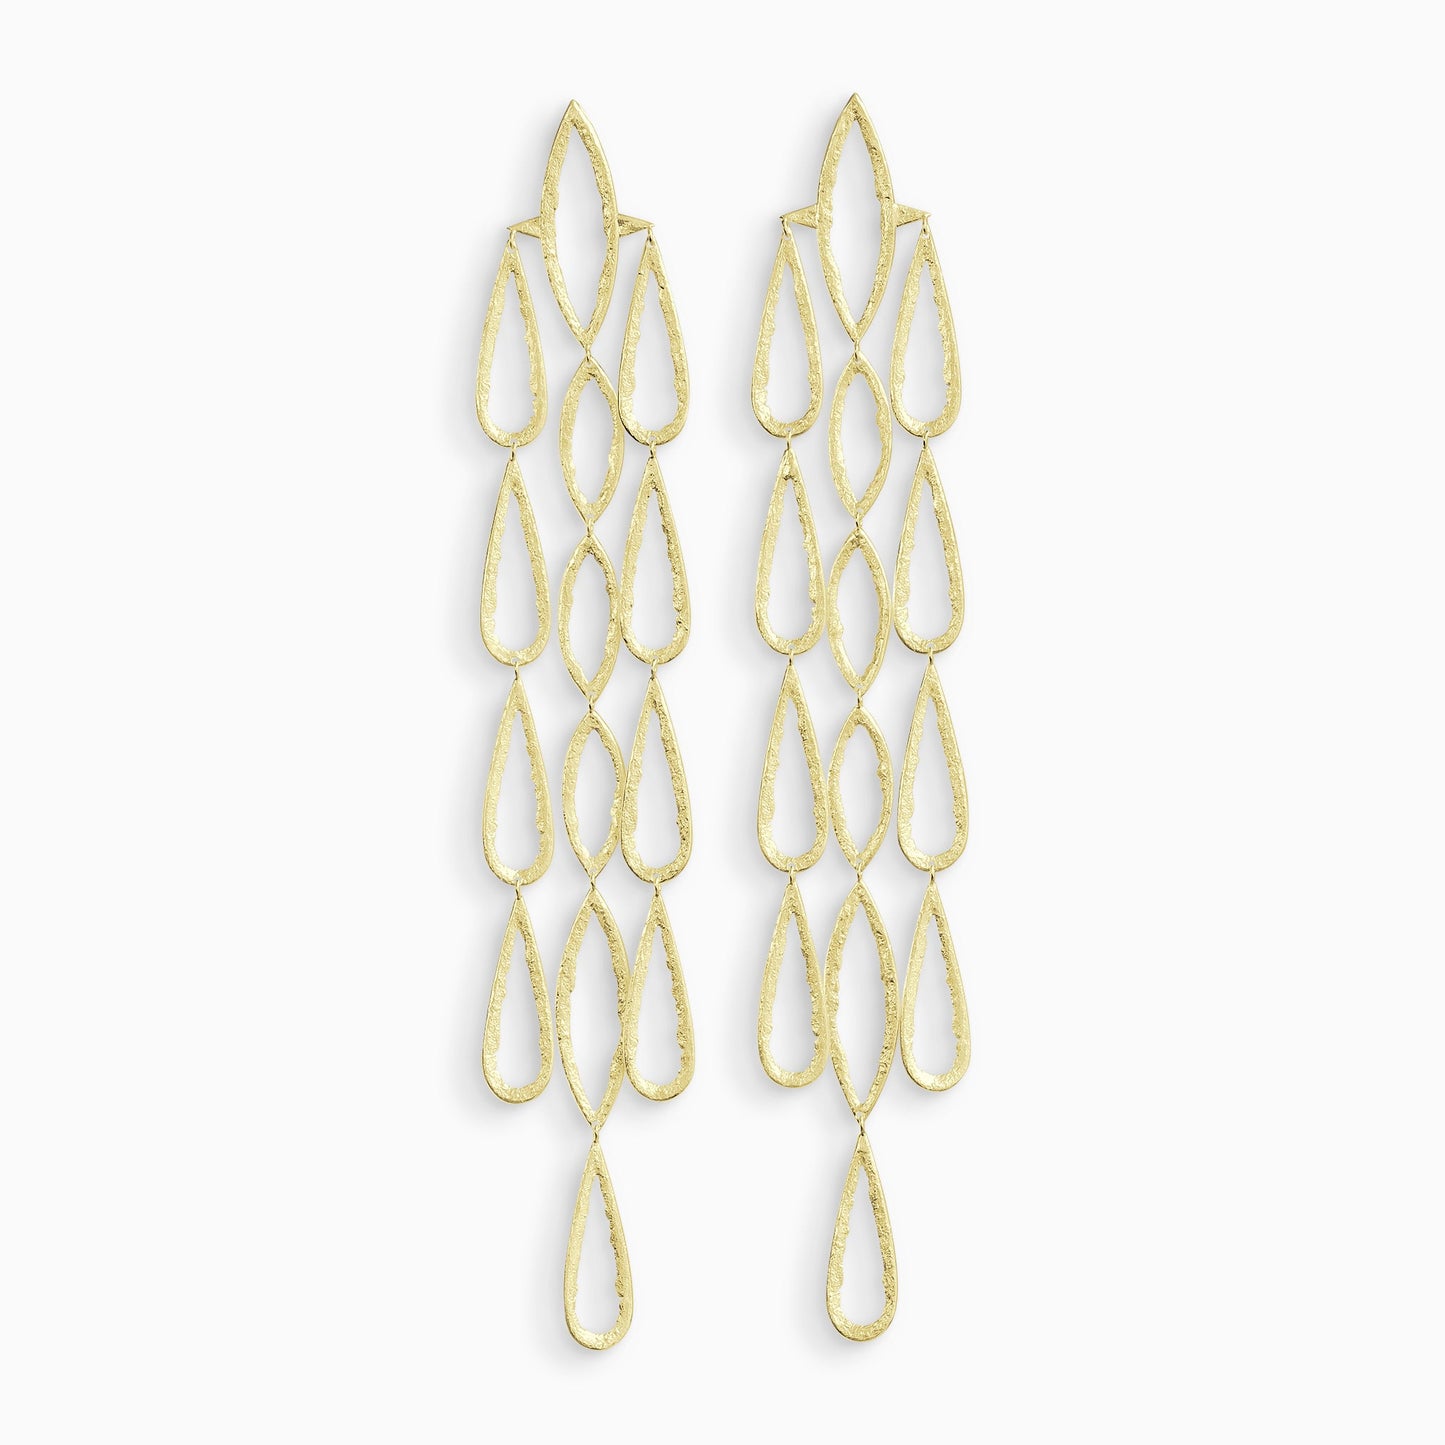 A pair of 18ct Fairtrade yellow gold drop earrings. 3 parallel lines of articulating large teardrop shapes hang from a large lozenge shapes with a stud ear fastening . These open shapes have a strong organic texture and are smooth on the outside edges with fragmented inside edges. 192mm length. 32mm width.